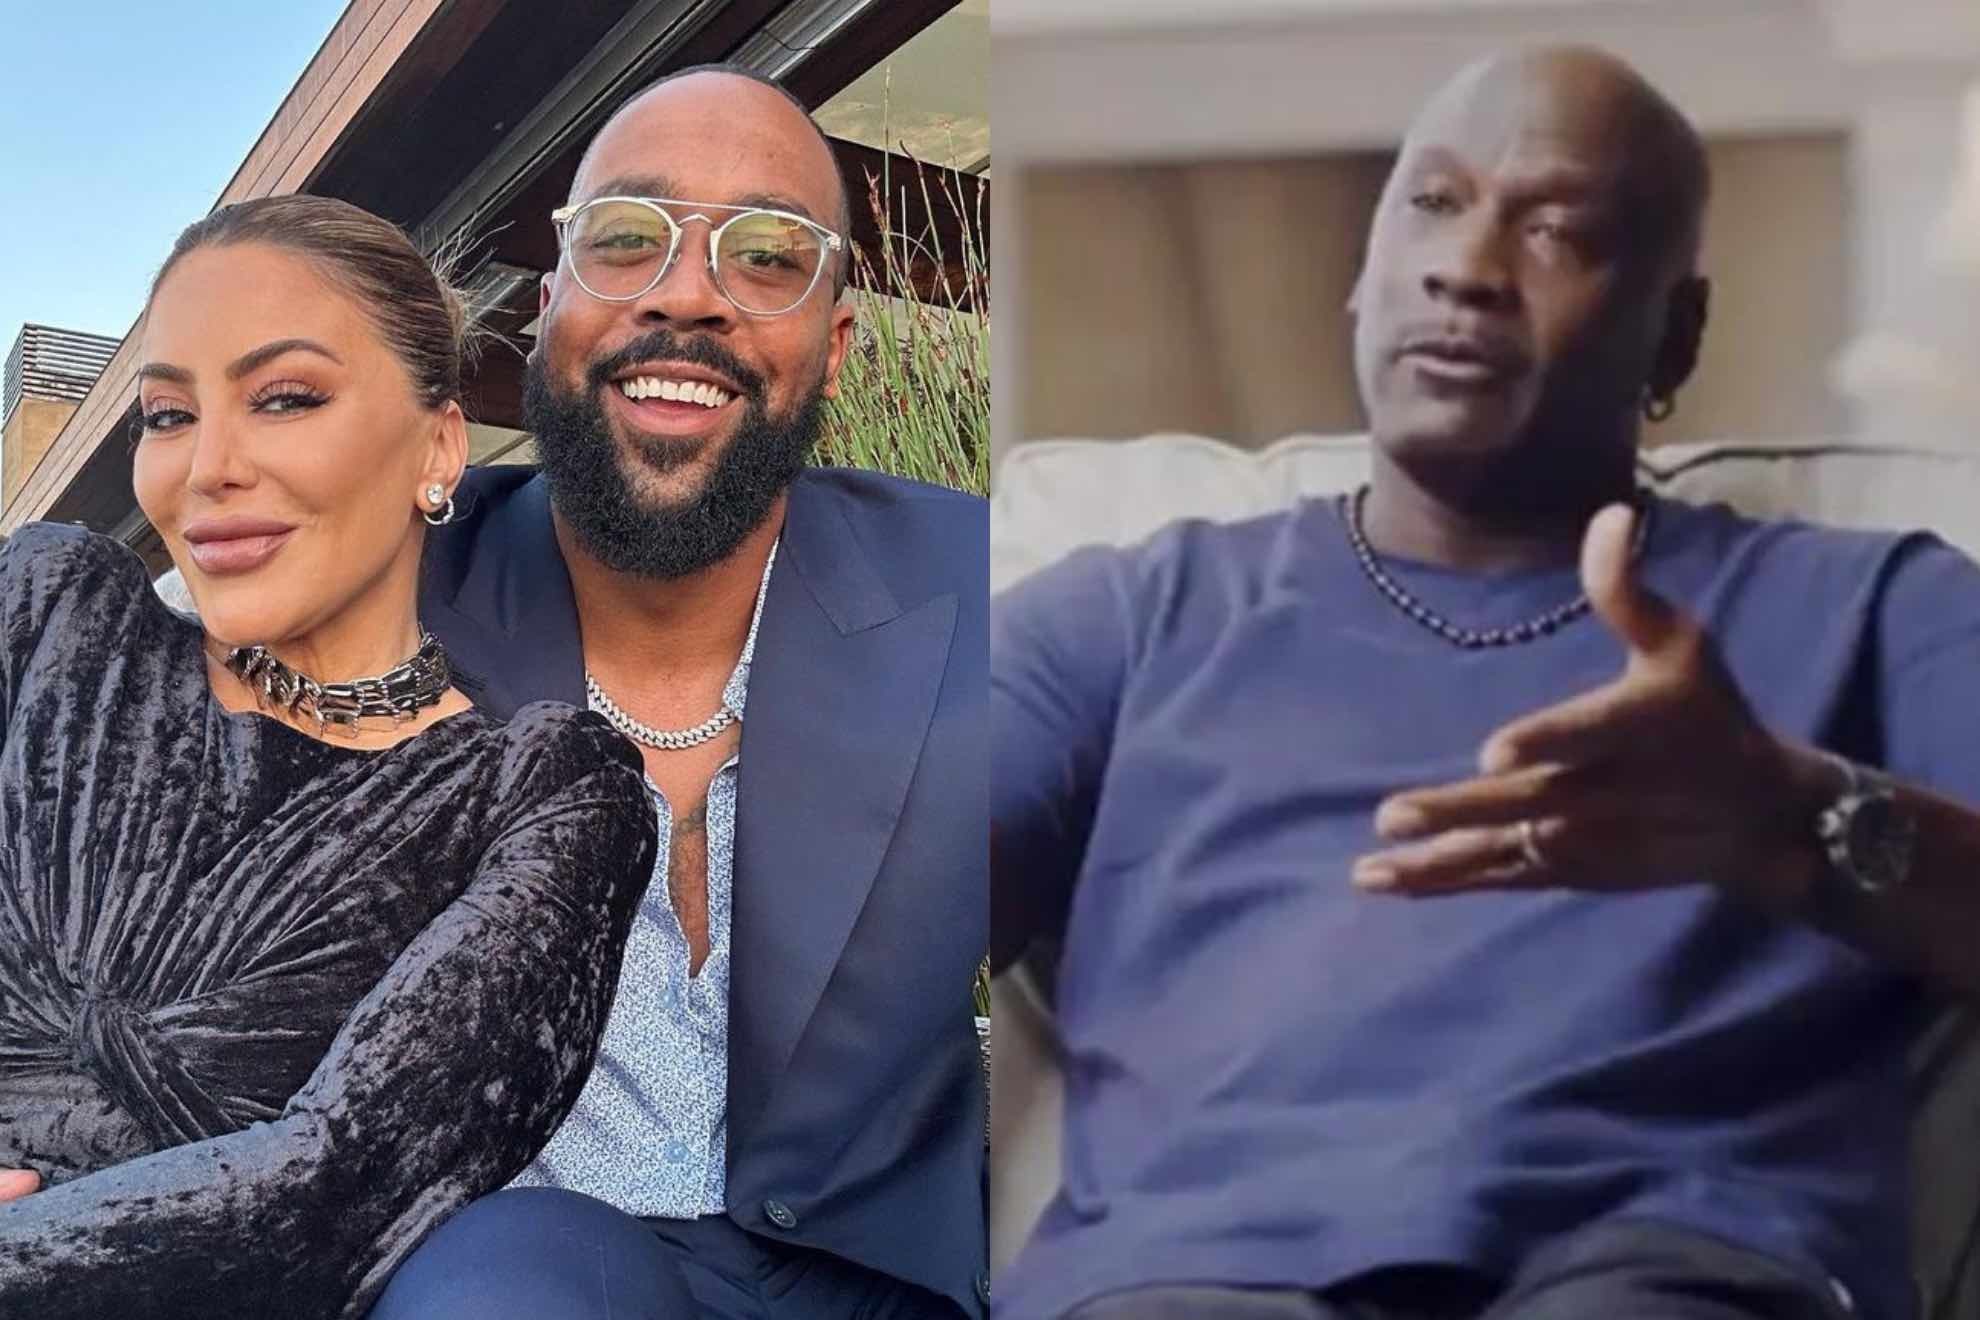 Michael Jordan had a harsh message for his son about getting married to Scottie Pippen's ex-wife